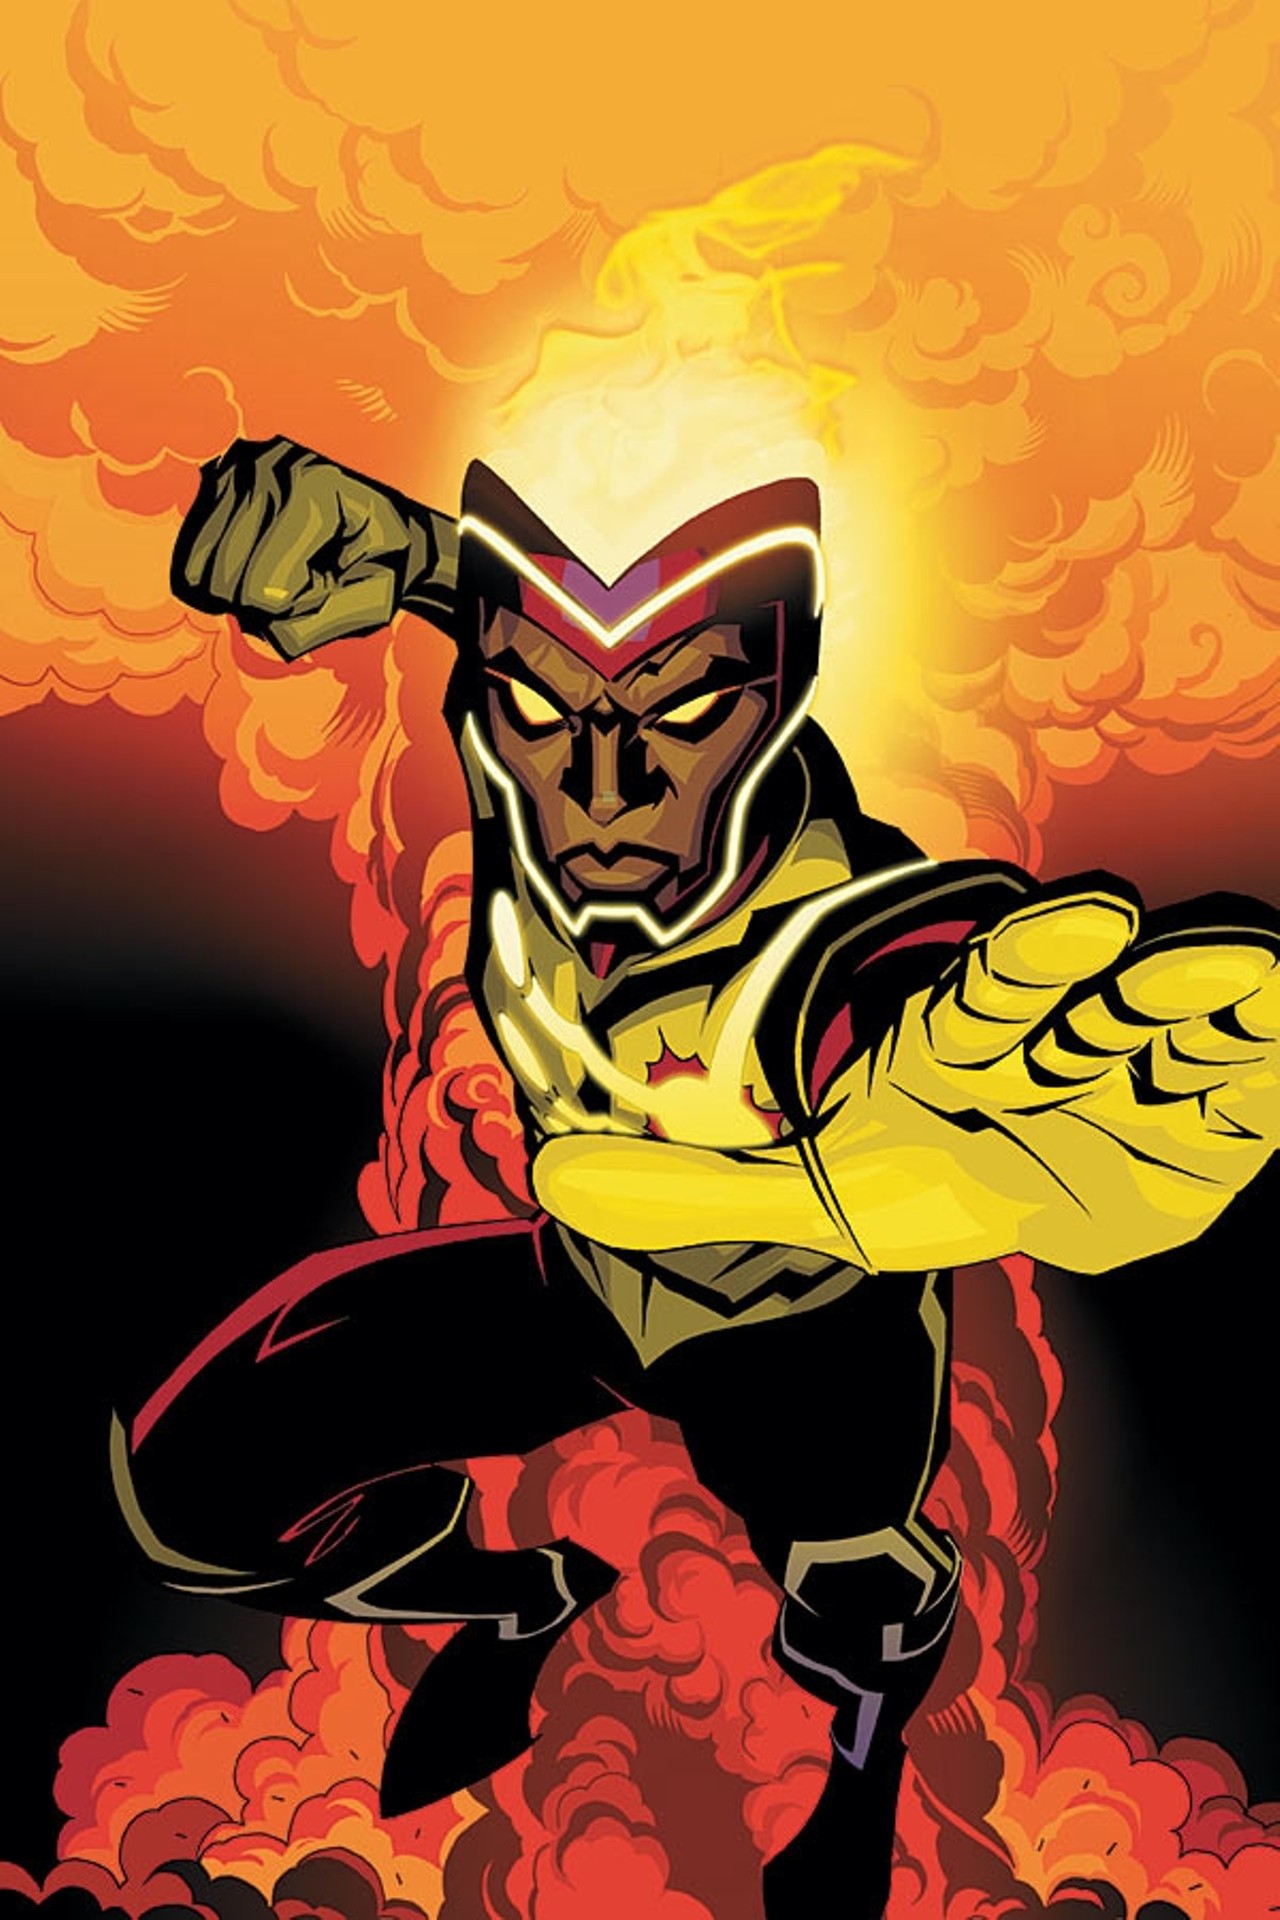 Firestorm
Like Green Lantern and Deathlok, there have been a few different Firestorms over the years. It’s the Jason Rusch version who is from Detroit – a 17-year-old who found himself gifted with the powers of the firestorm matrix. He’s a sort of nuclear man with a fiery head. The current version of the character has Rusch and original Firestorm Ronnie Raymond inhabiting the same Firestorm body.